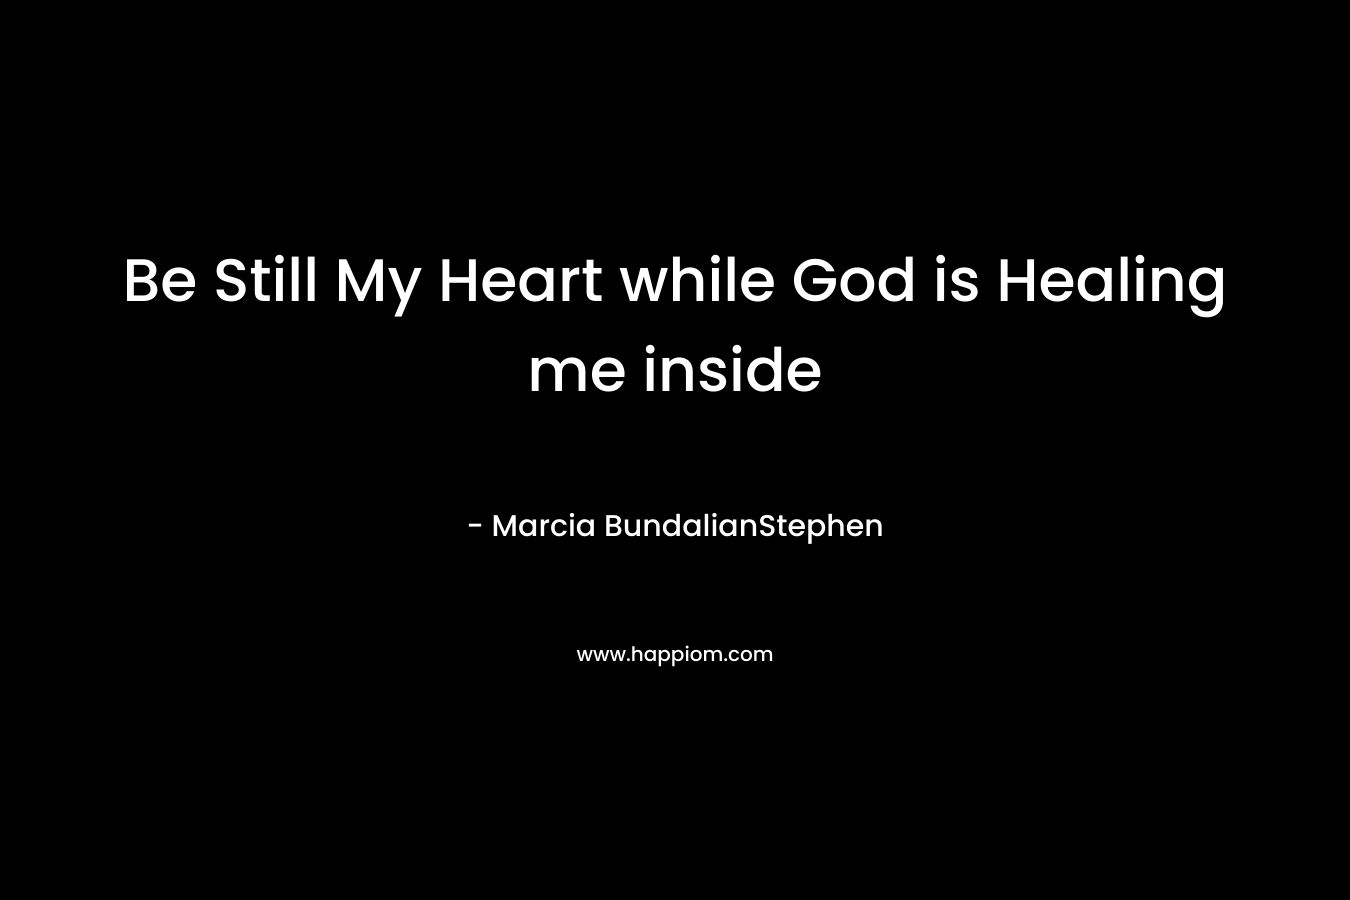 Be Still My Heart while God is Healing me inside